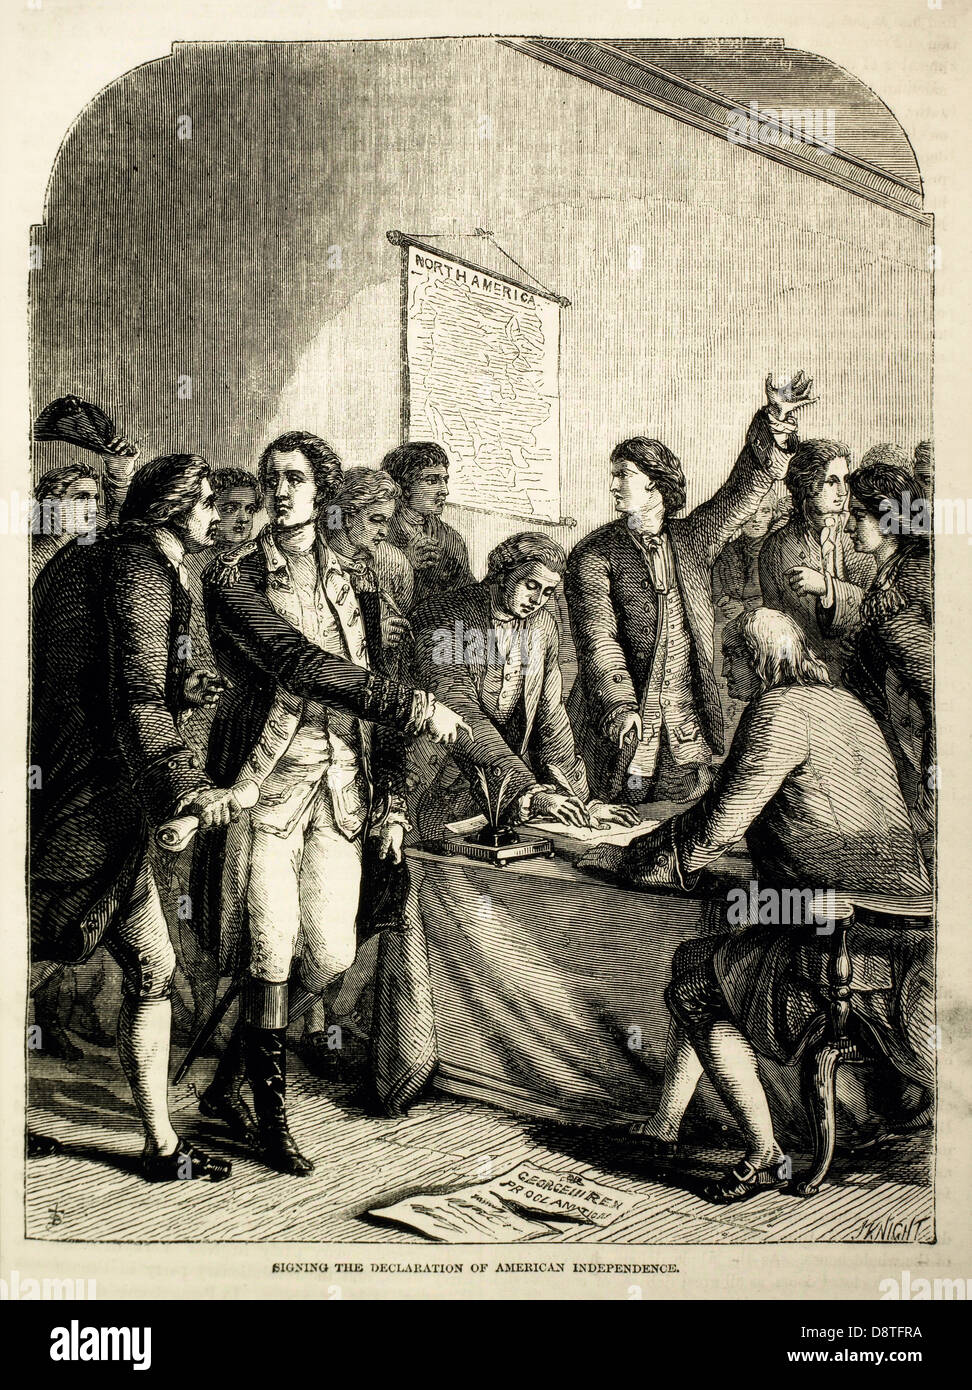 Signing of the Declaration of American Independence 1776, Illustration Stock Photo